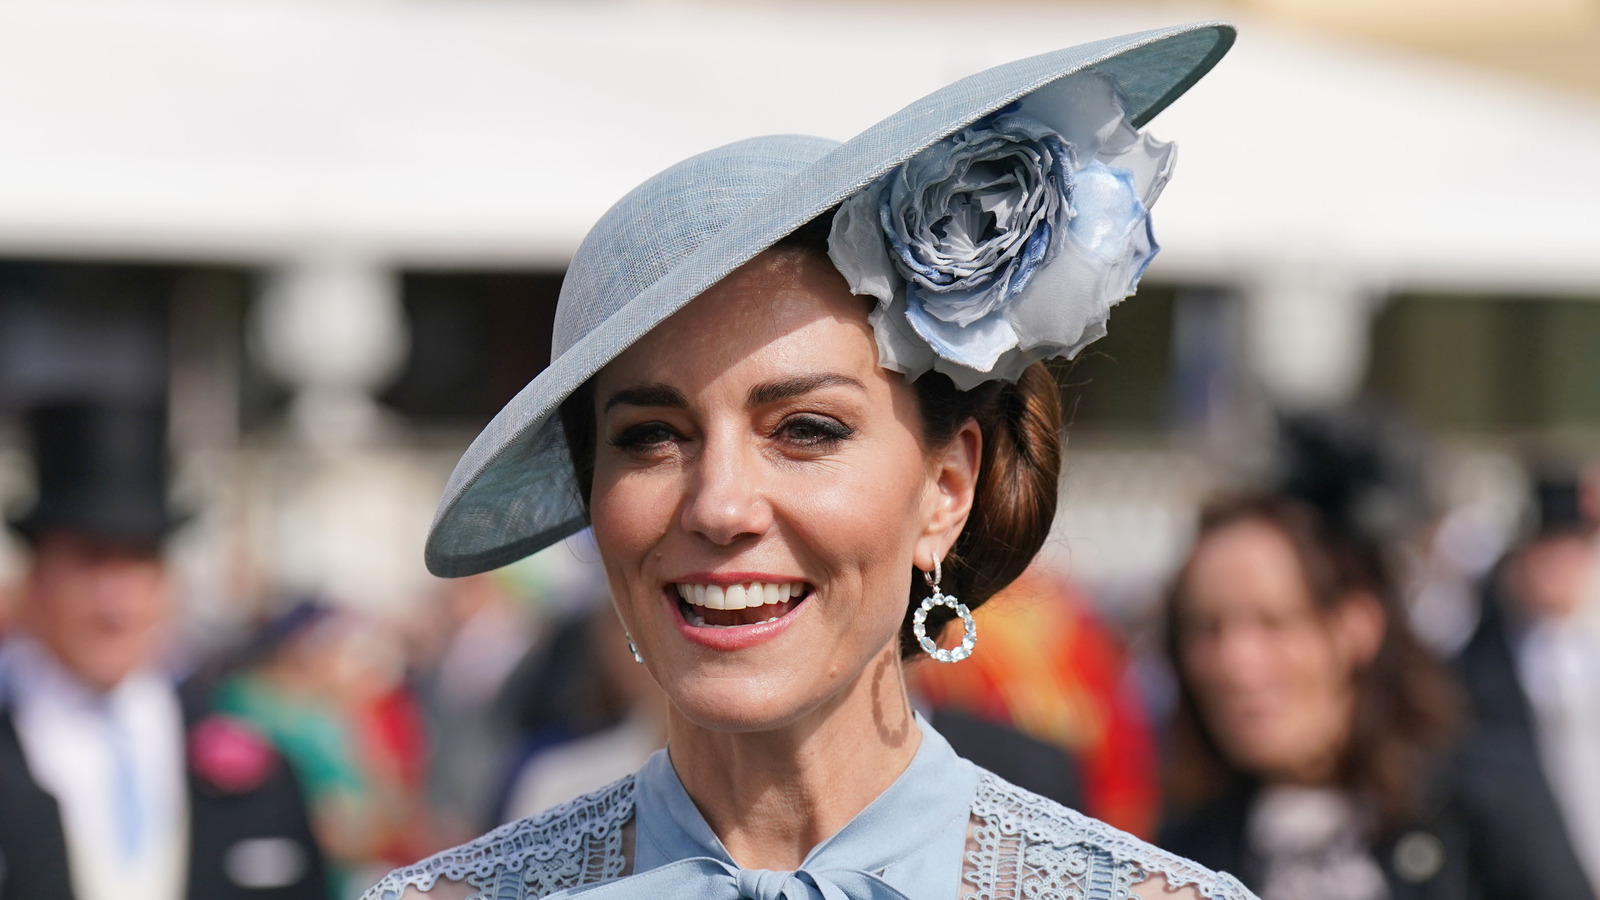 Times Kate Middleton Experienced Classism